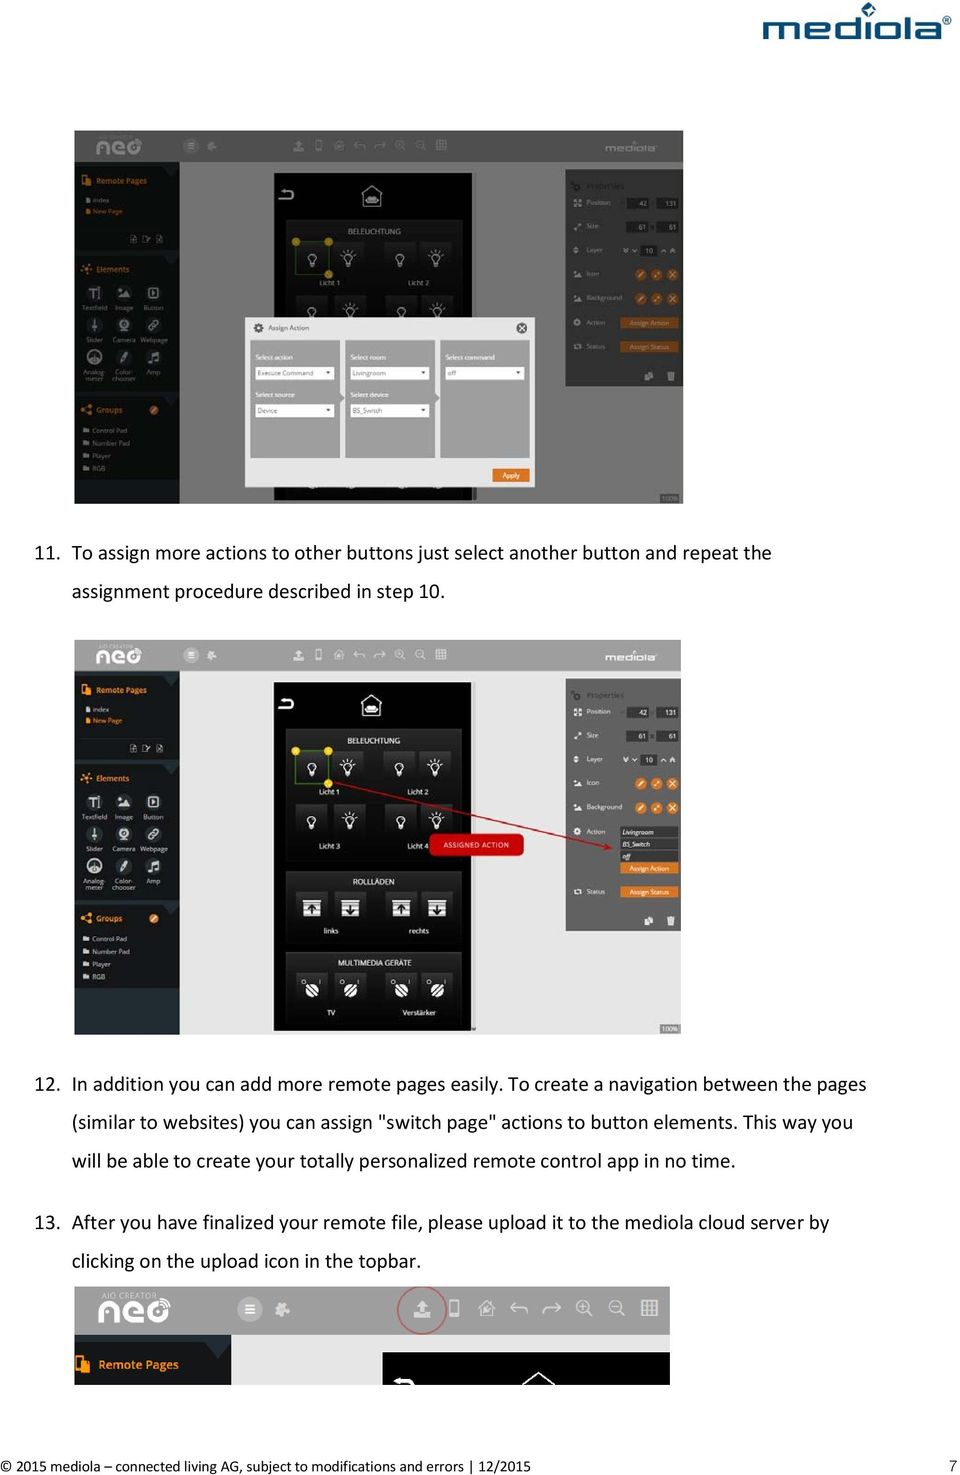 To create a navigation between the pages (similar to websites) you can assign "switch page" actions to button elements.